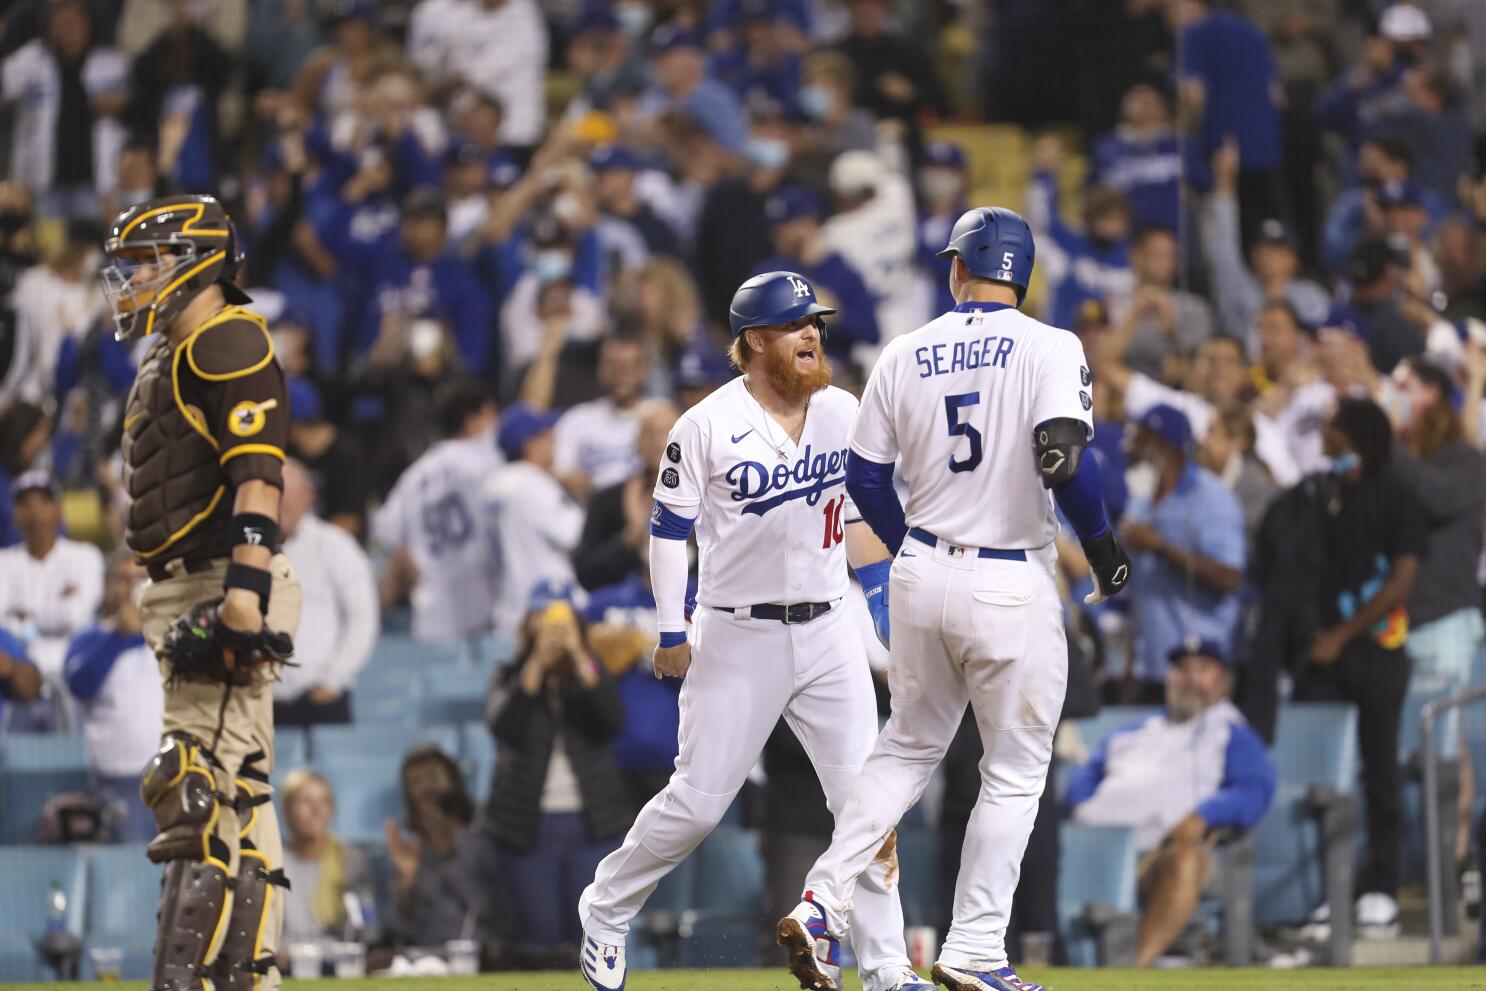 Dodgers roar back with four homers in eighth inning to beat Padres